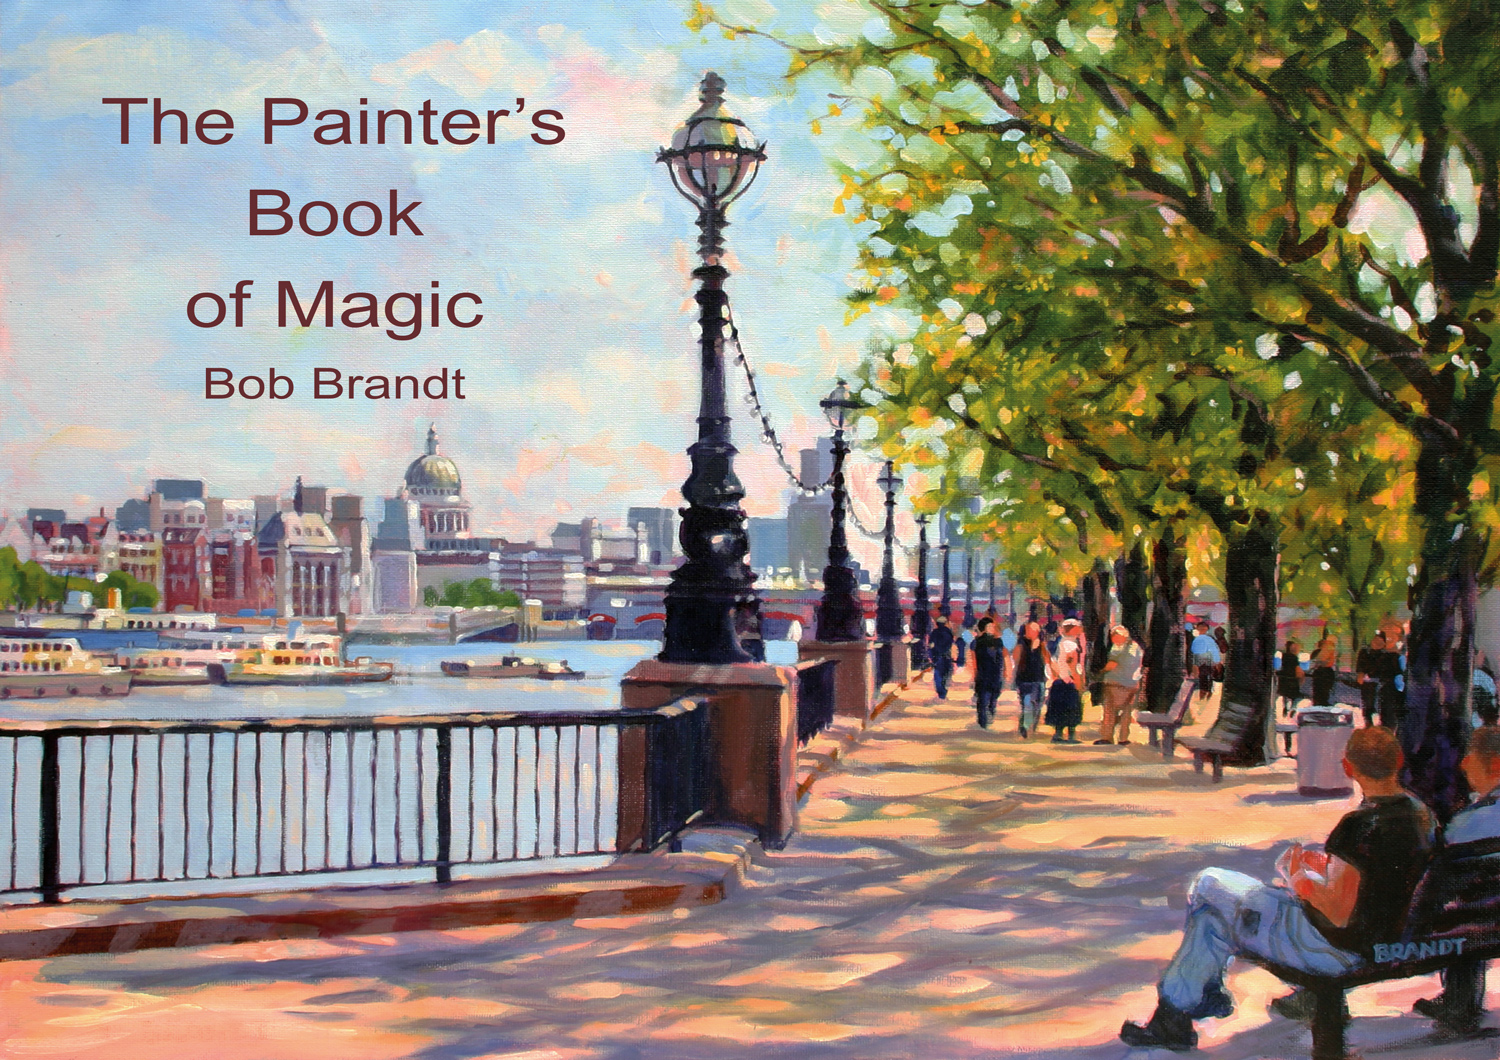 The Painter's Book of Magic